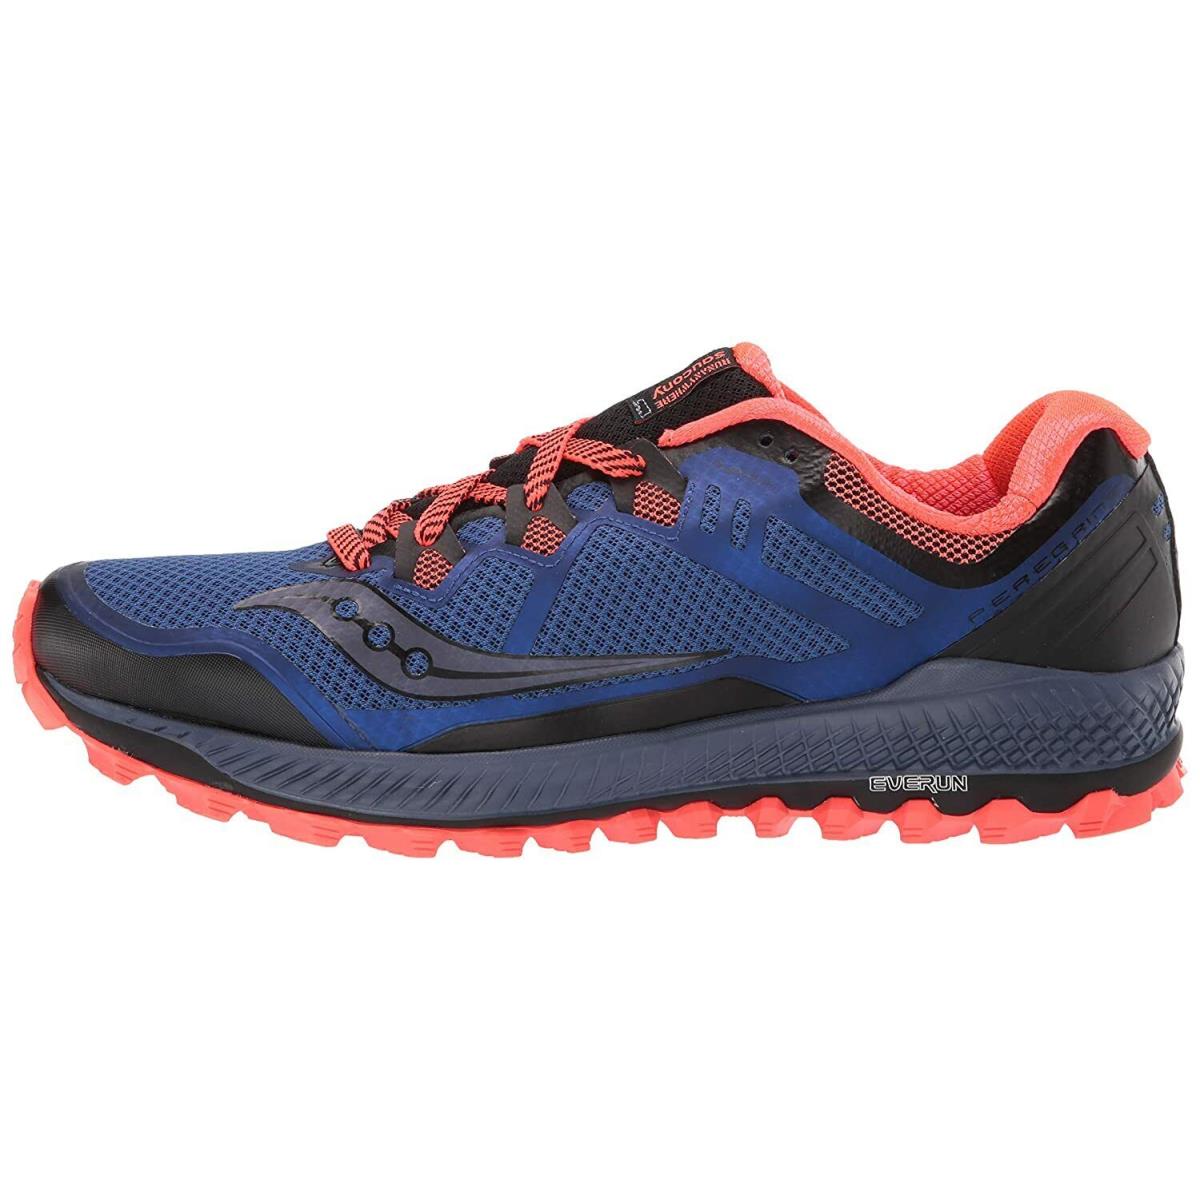 Saucony Men`s Peregrine 8 Low Top Mesh Running Shoes Blue/black/red Size 14 M